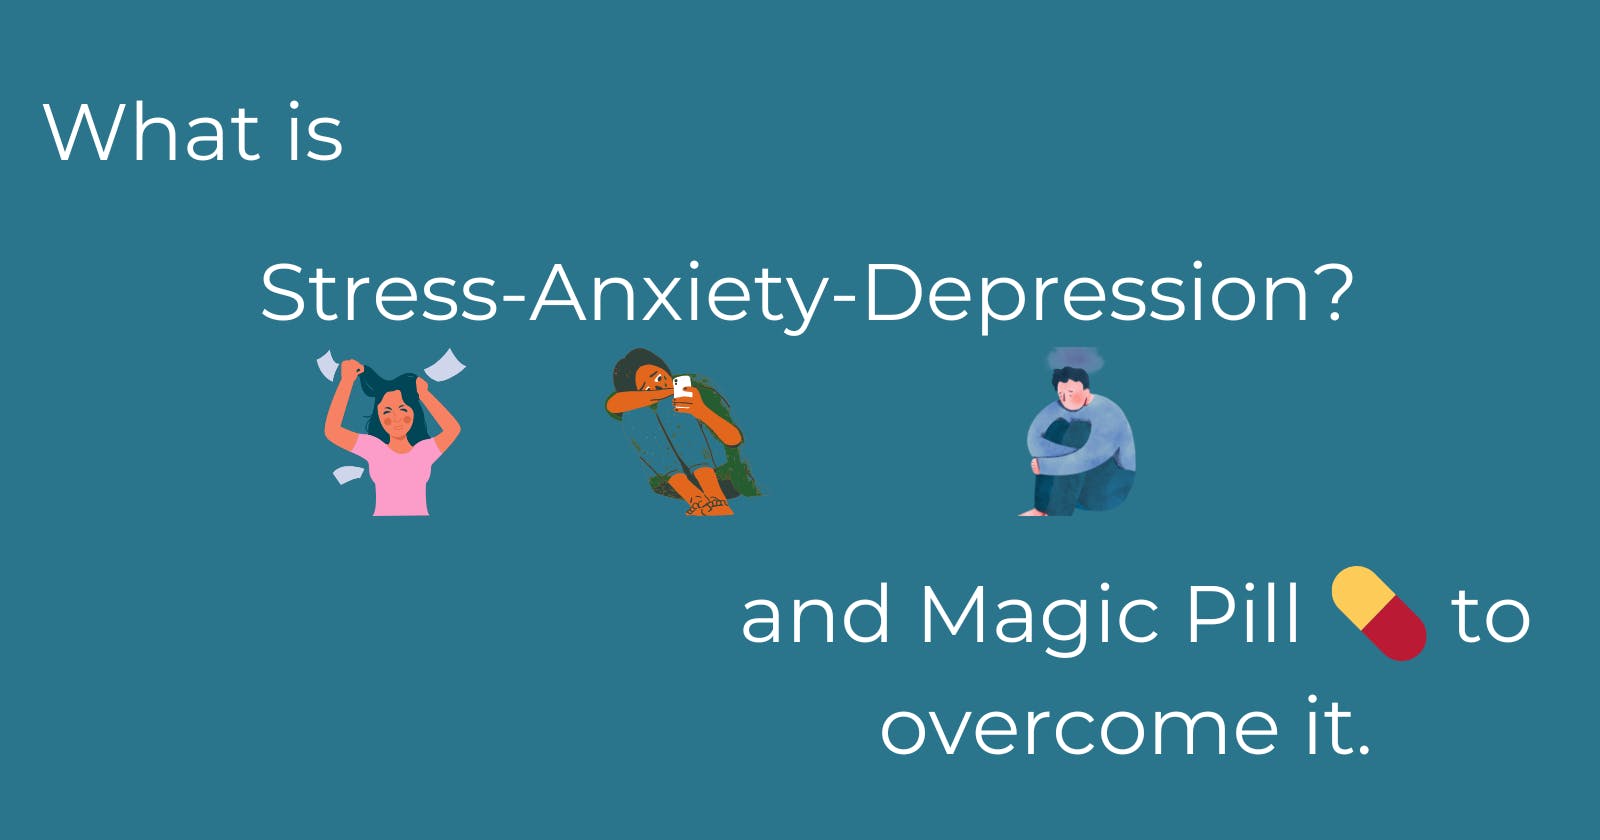 What is stress/anxiety/Depression? and the Magic Pill 💊 to overcome it.